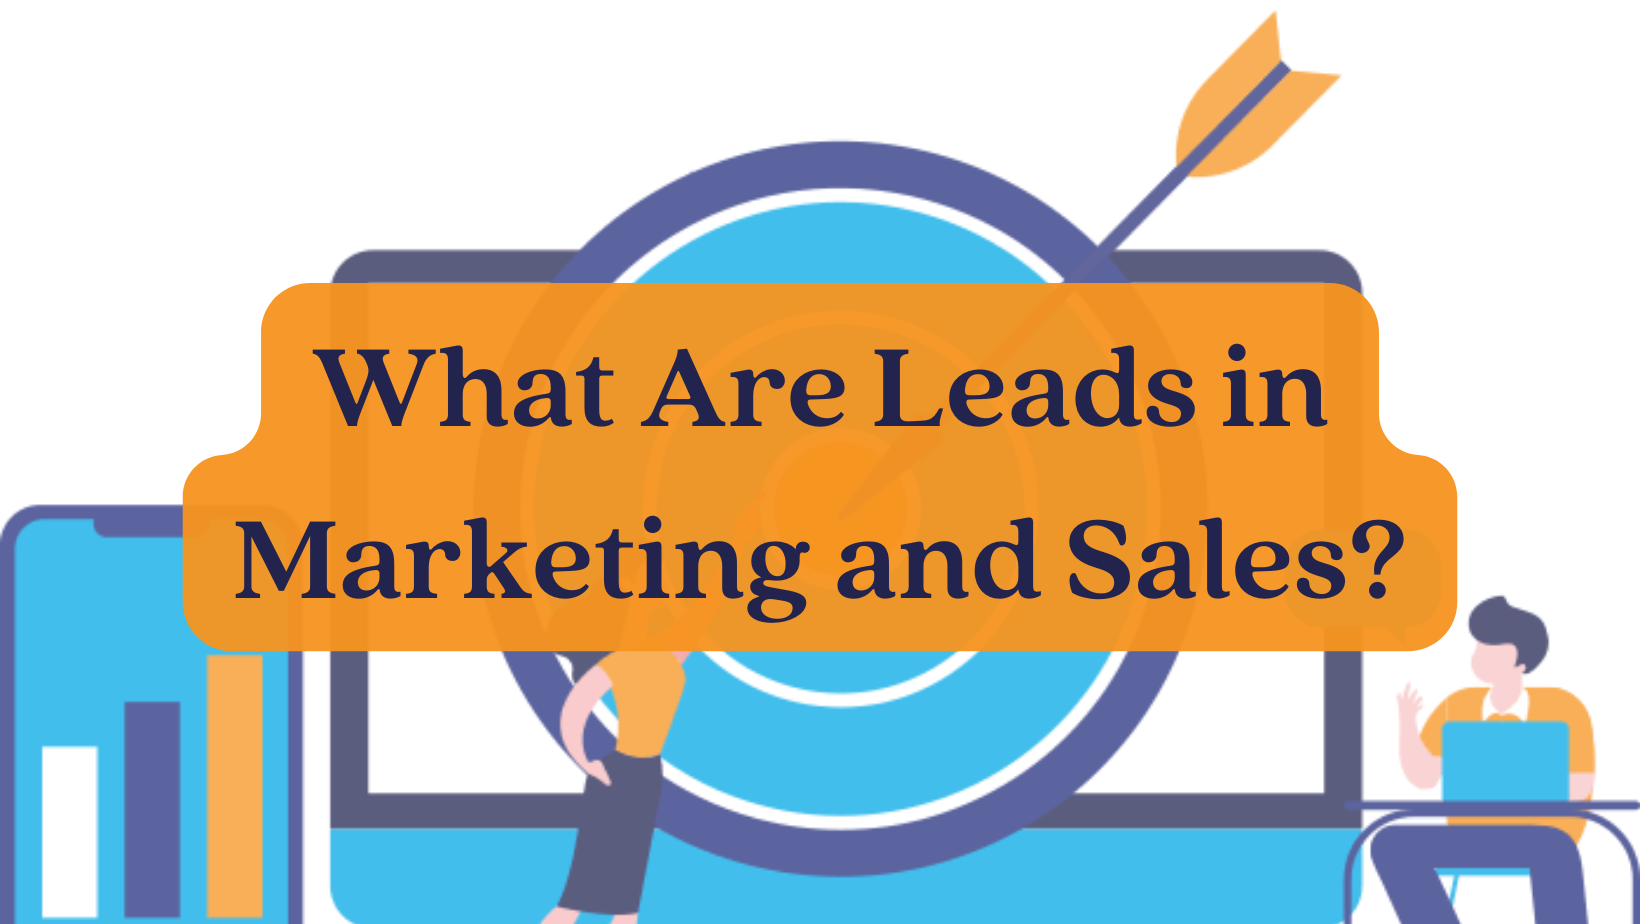 What Are Leads in Marketing and Sales?